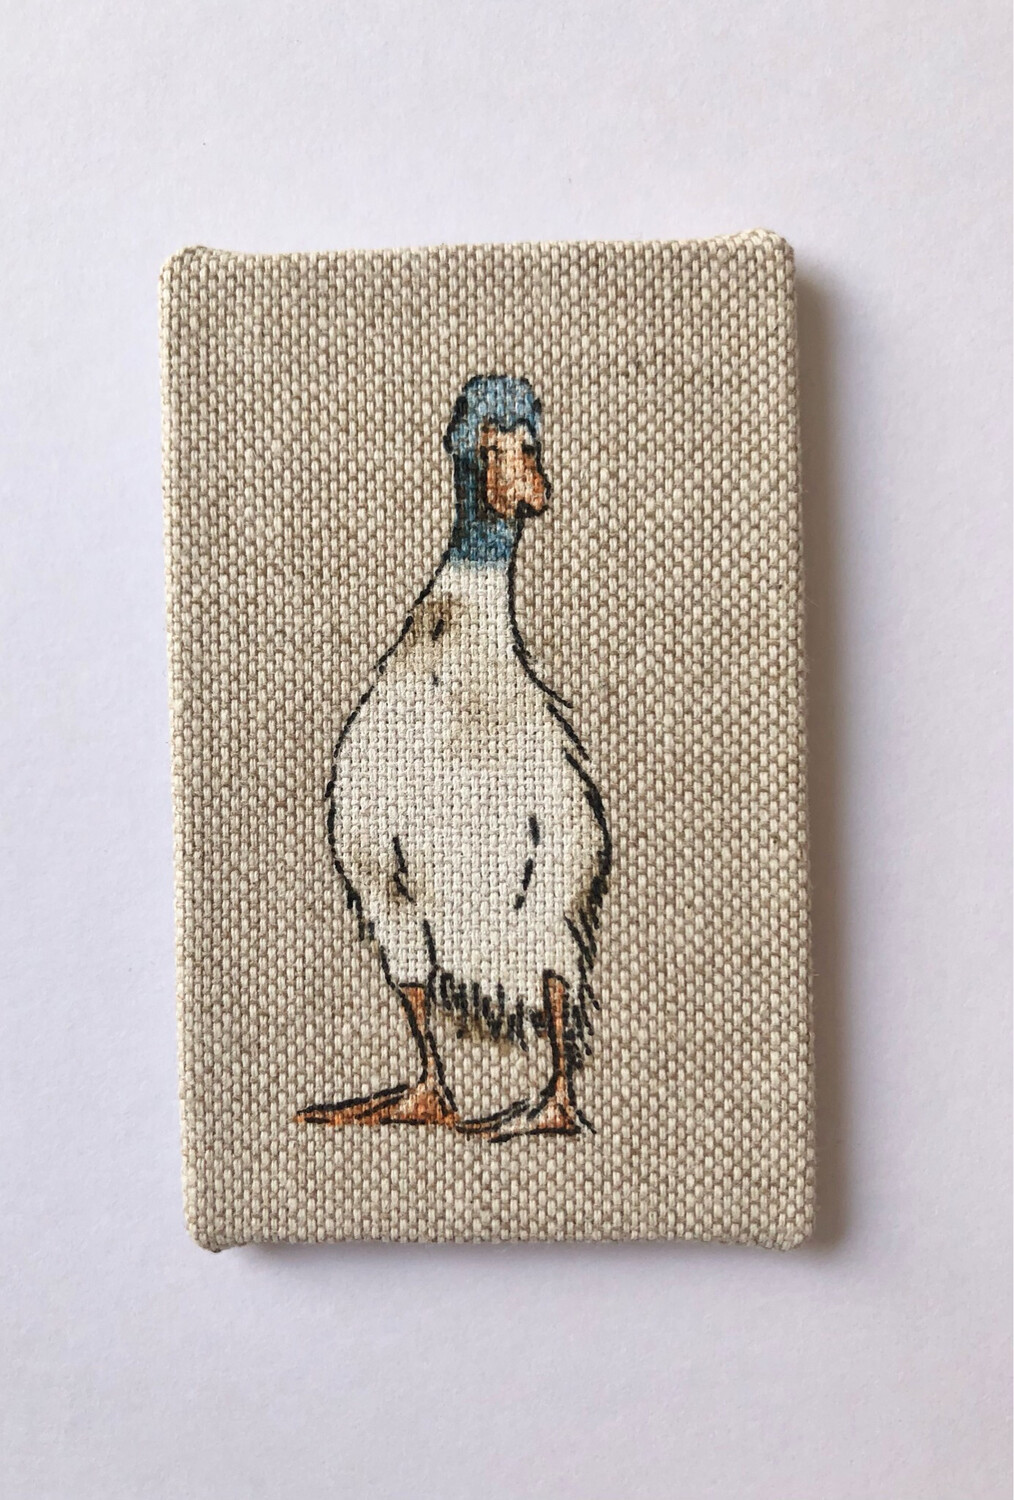 1:12 scale ‘Mr. Duck ‘ Canvas for dolls house